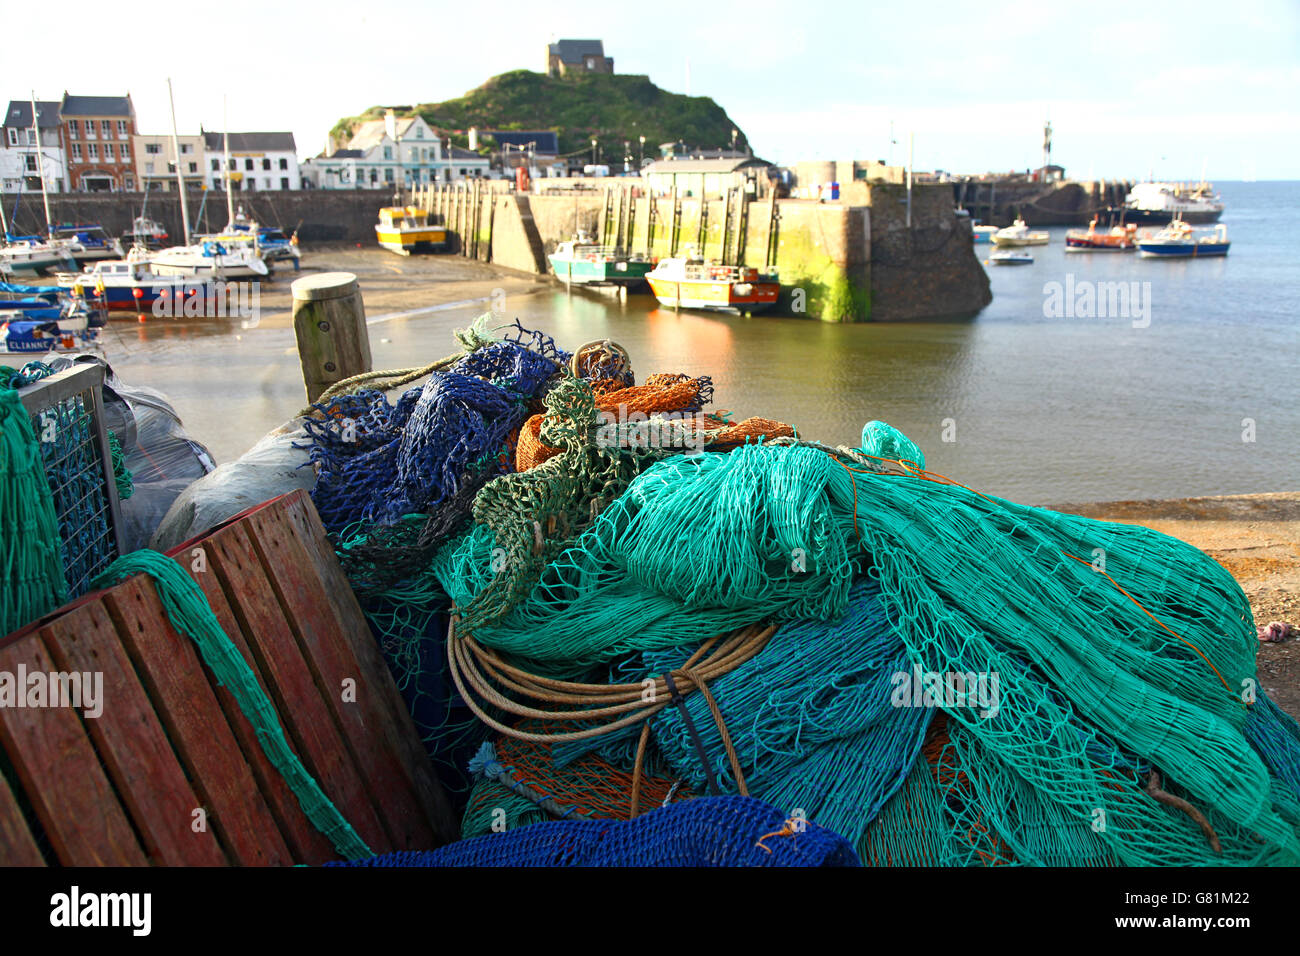 Colourful nets in the working harbour at Ilfracombe, North Devon, UK Stock Photo